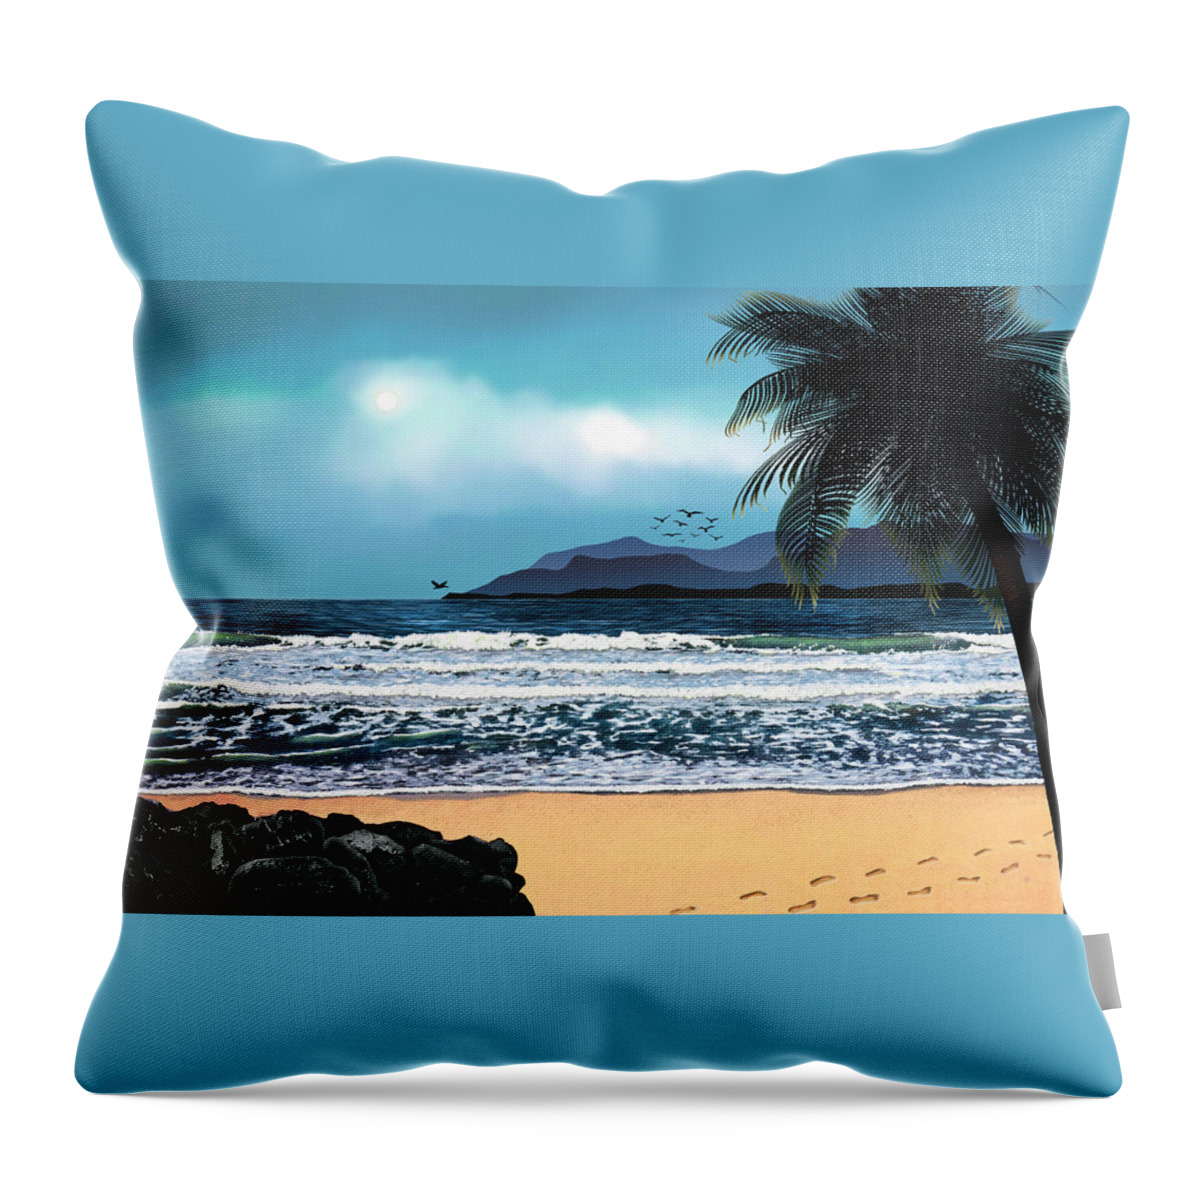 Footprints Throw Pillow featuring the painting Footprints in the Sand by David Arrigoni